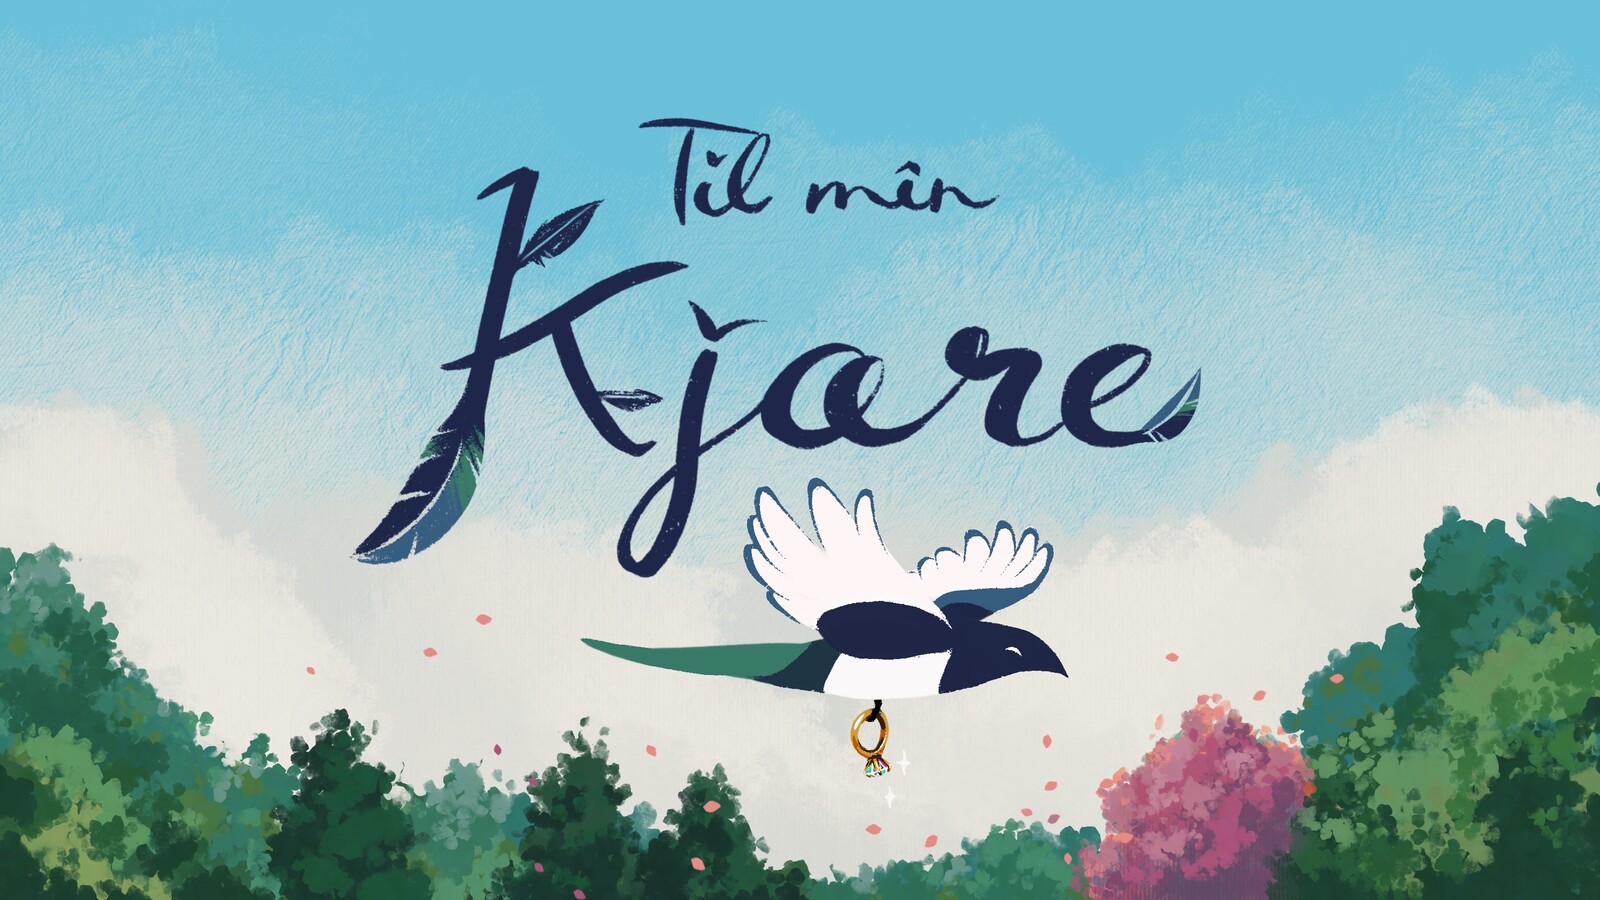 A little shortstory in illustrations about a magpie bringing a gift to its beloved. The title is in Norwegian and means "To my Beloved" (a wordplay on the norwegian word for magpie, ‘skjære’)